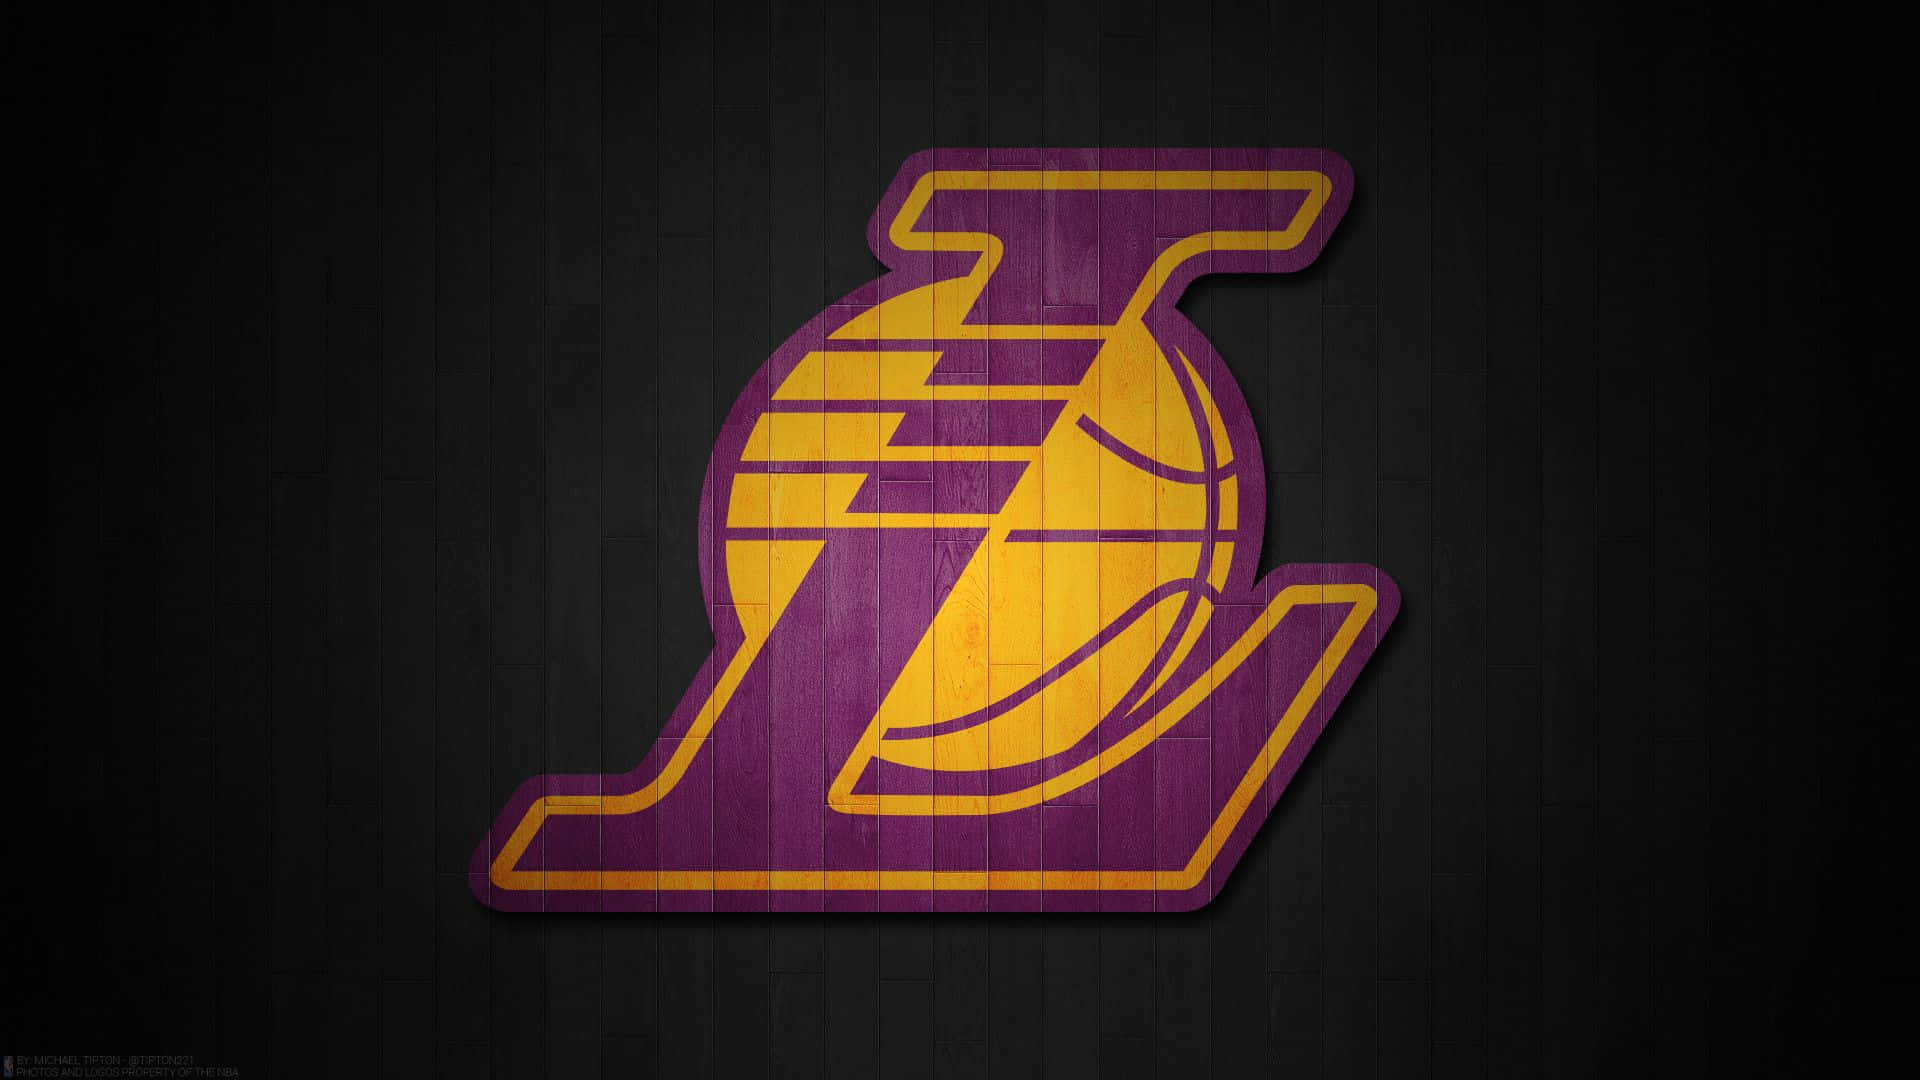 The Los Angeles Lakers - A Chasing of an Eternal Legacy